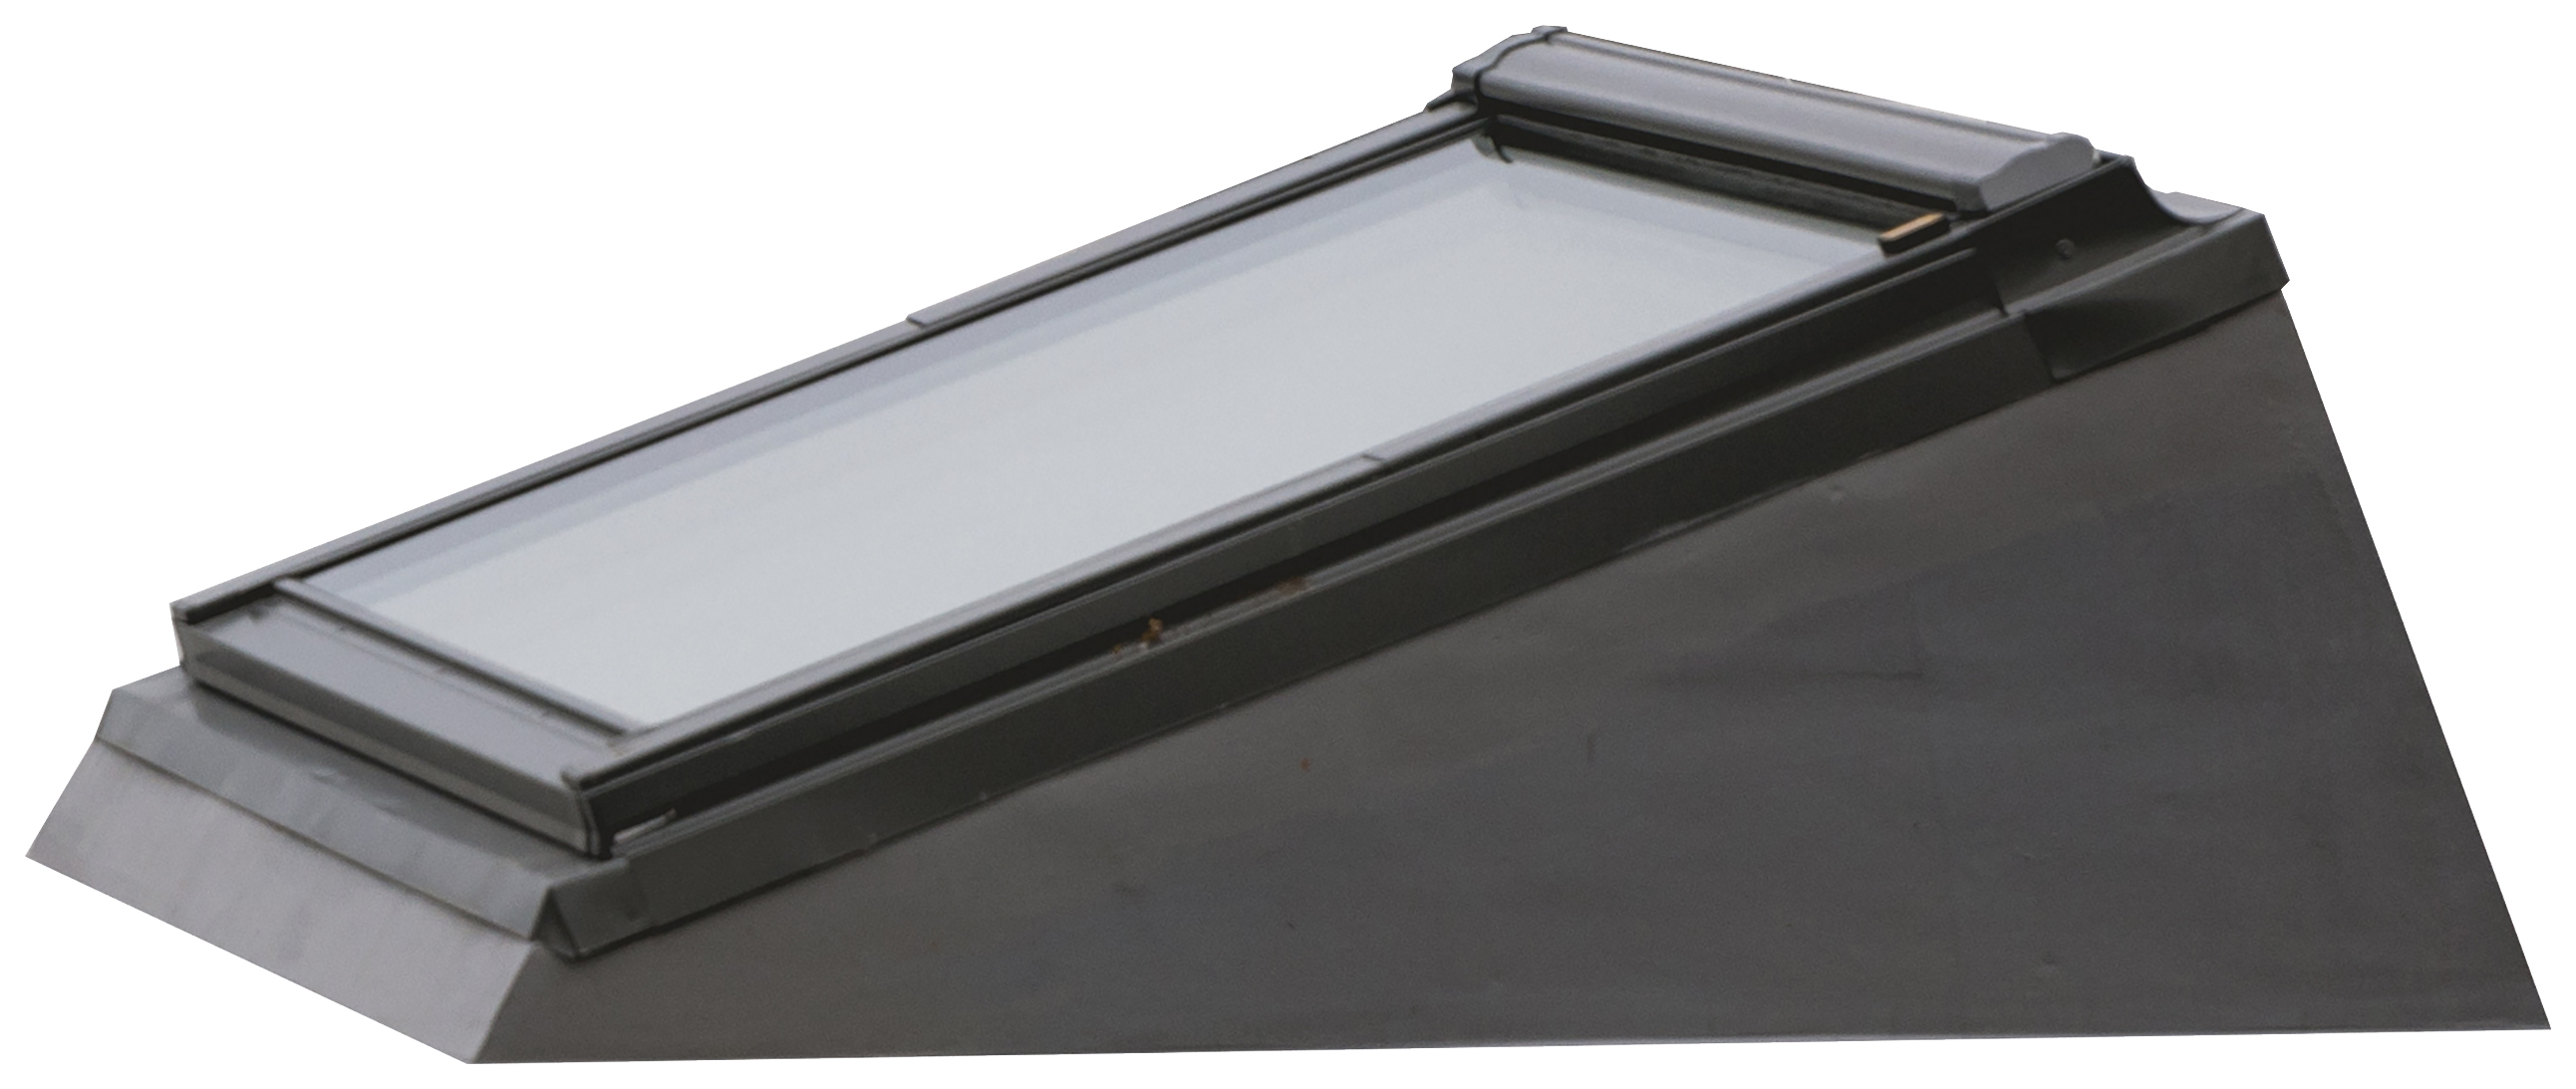 Image of Keylite FRS 05 Flat Roof System - 780 X 1180mm